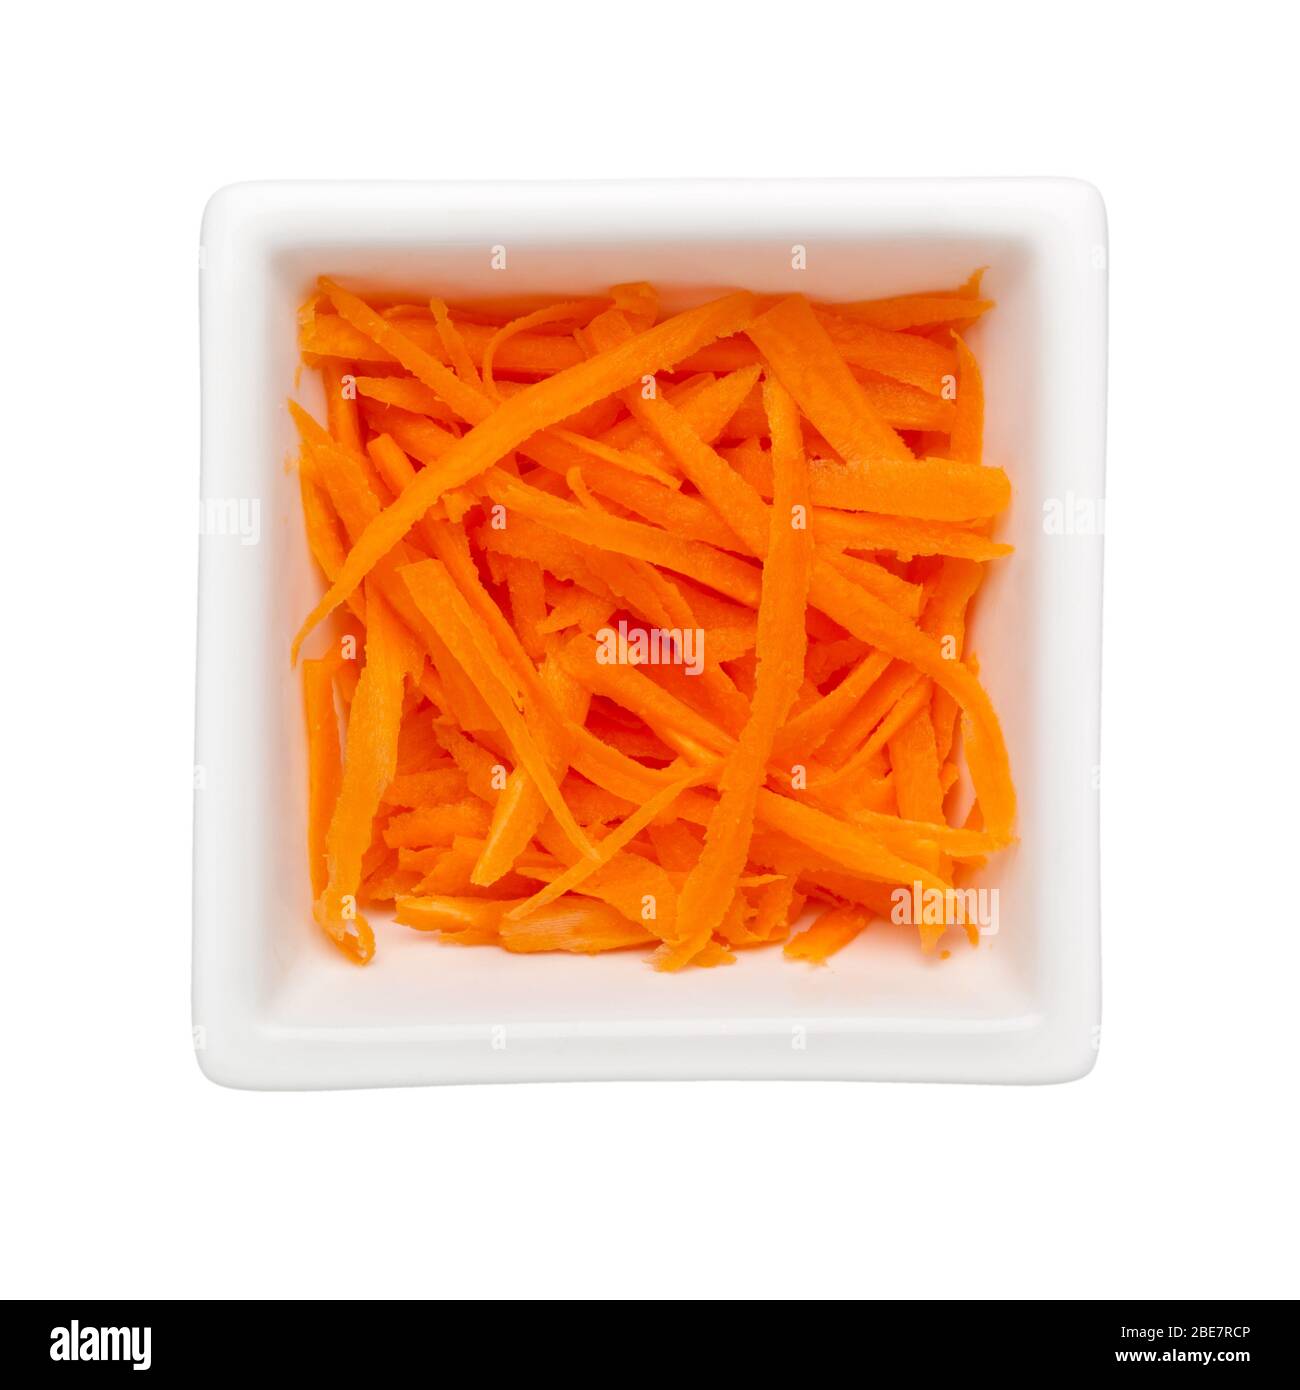 Shreds of carrot in a square bowl isolated on white background Stock Photo